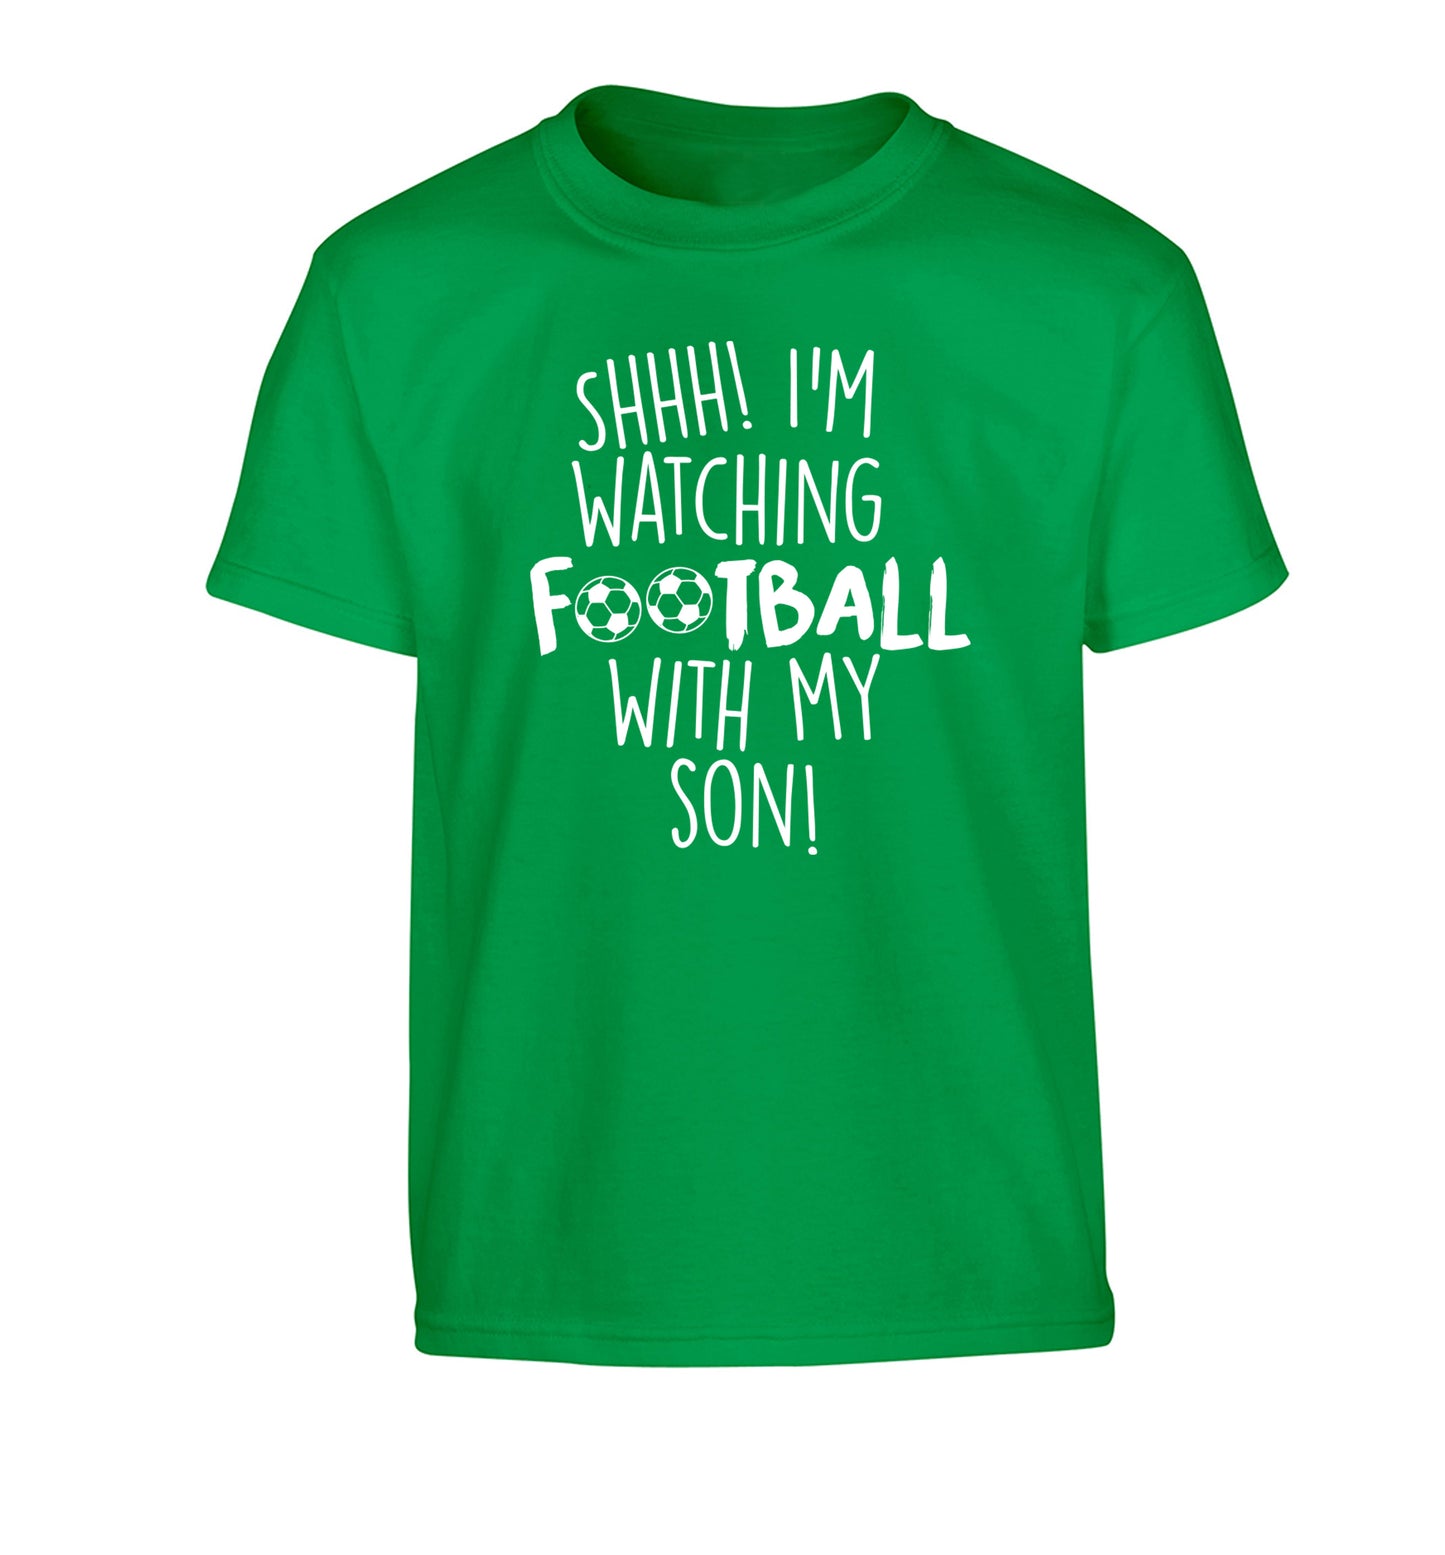 Shhh I'm watching football with my son Children's green Tshirt 12-14 Years